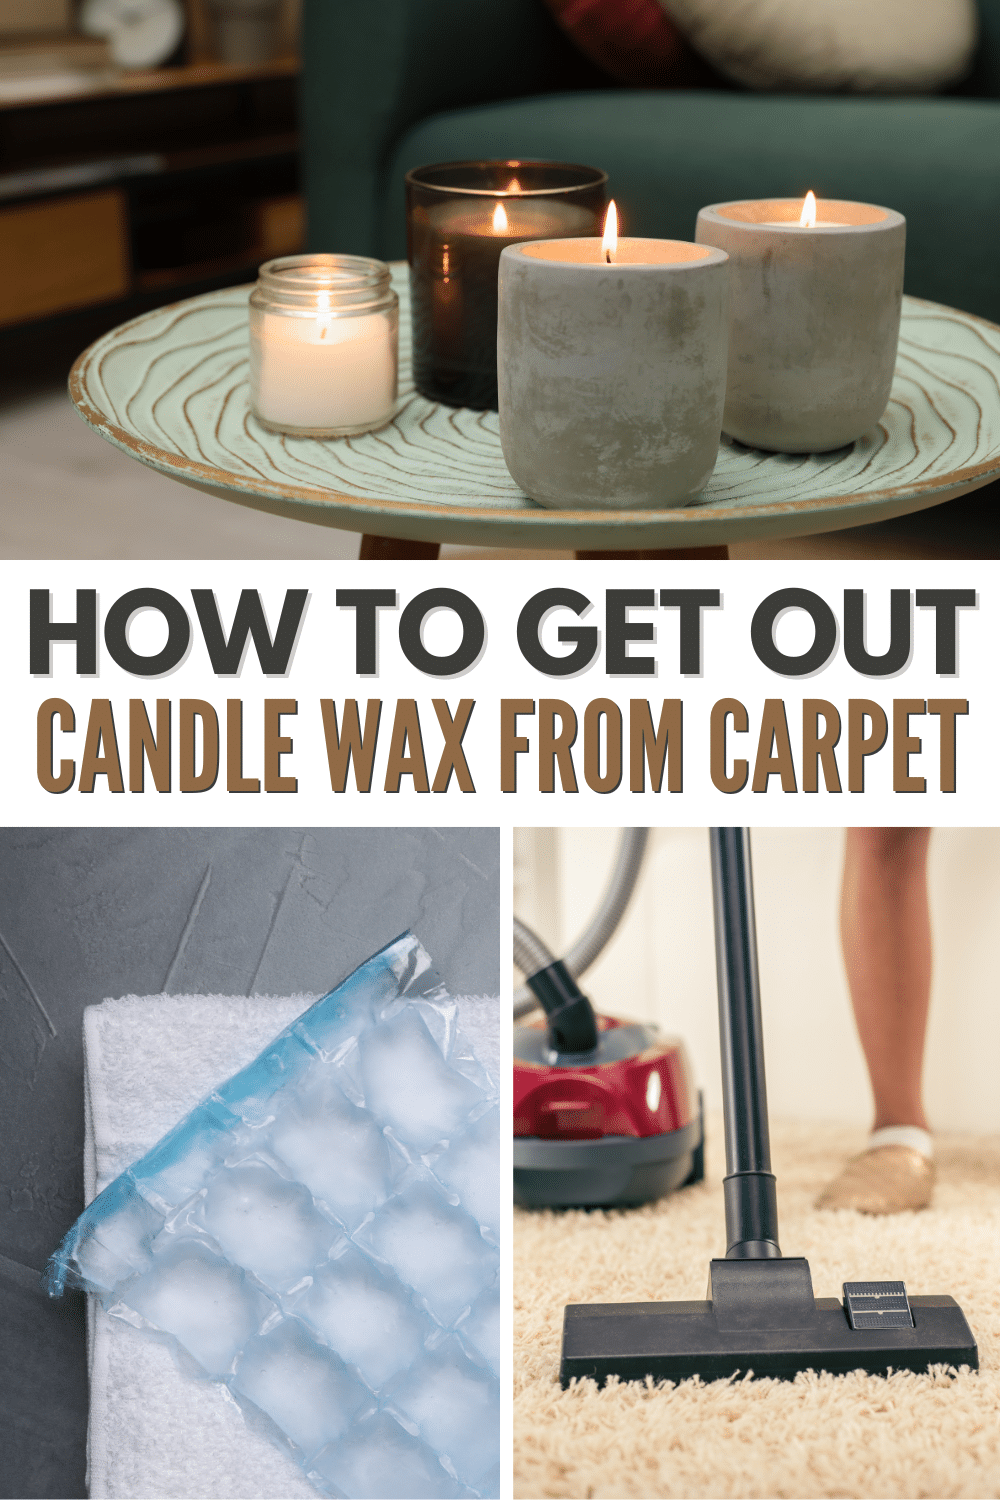 Removing candle wax from carpet.